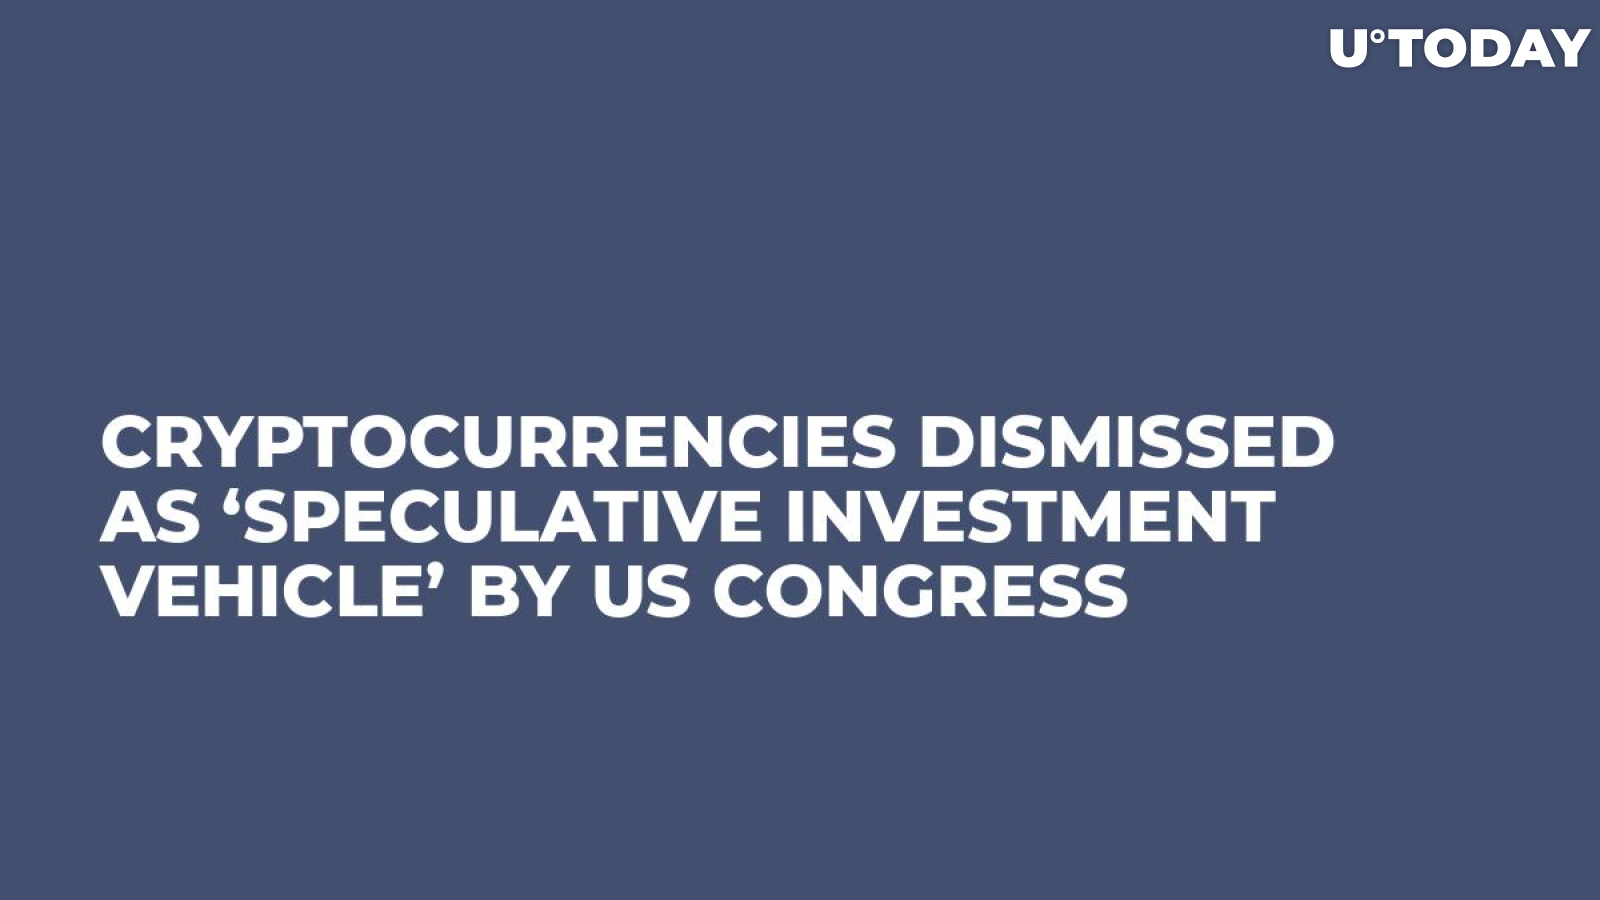 Cryptocurrencies Dismissed as ‘Speculative Investment Vehicle’ by US Congress